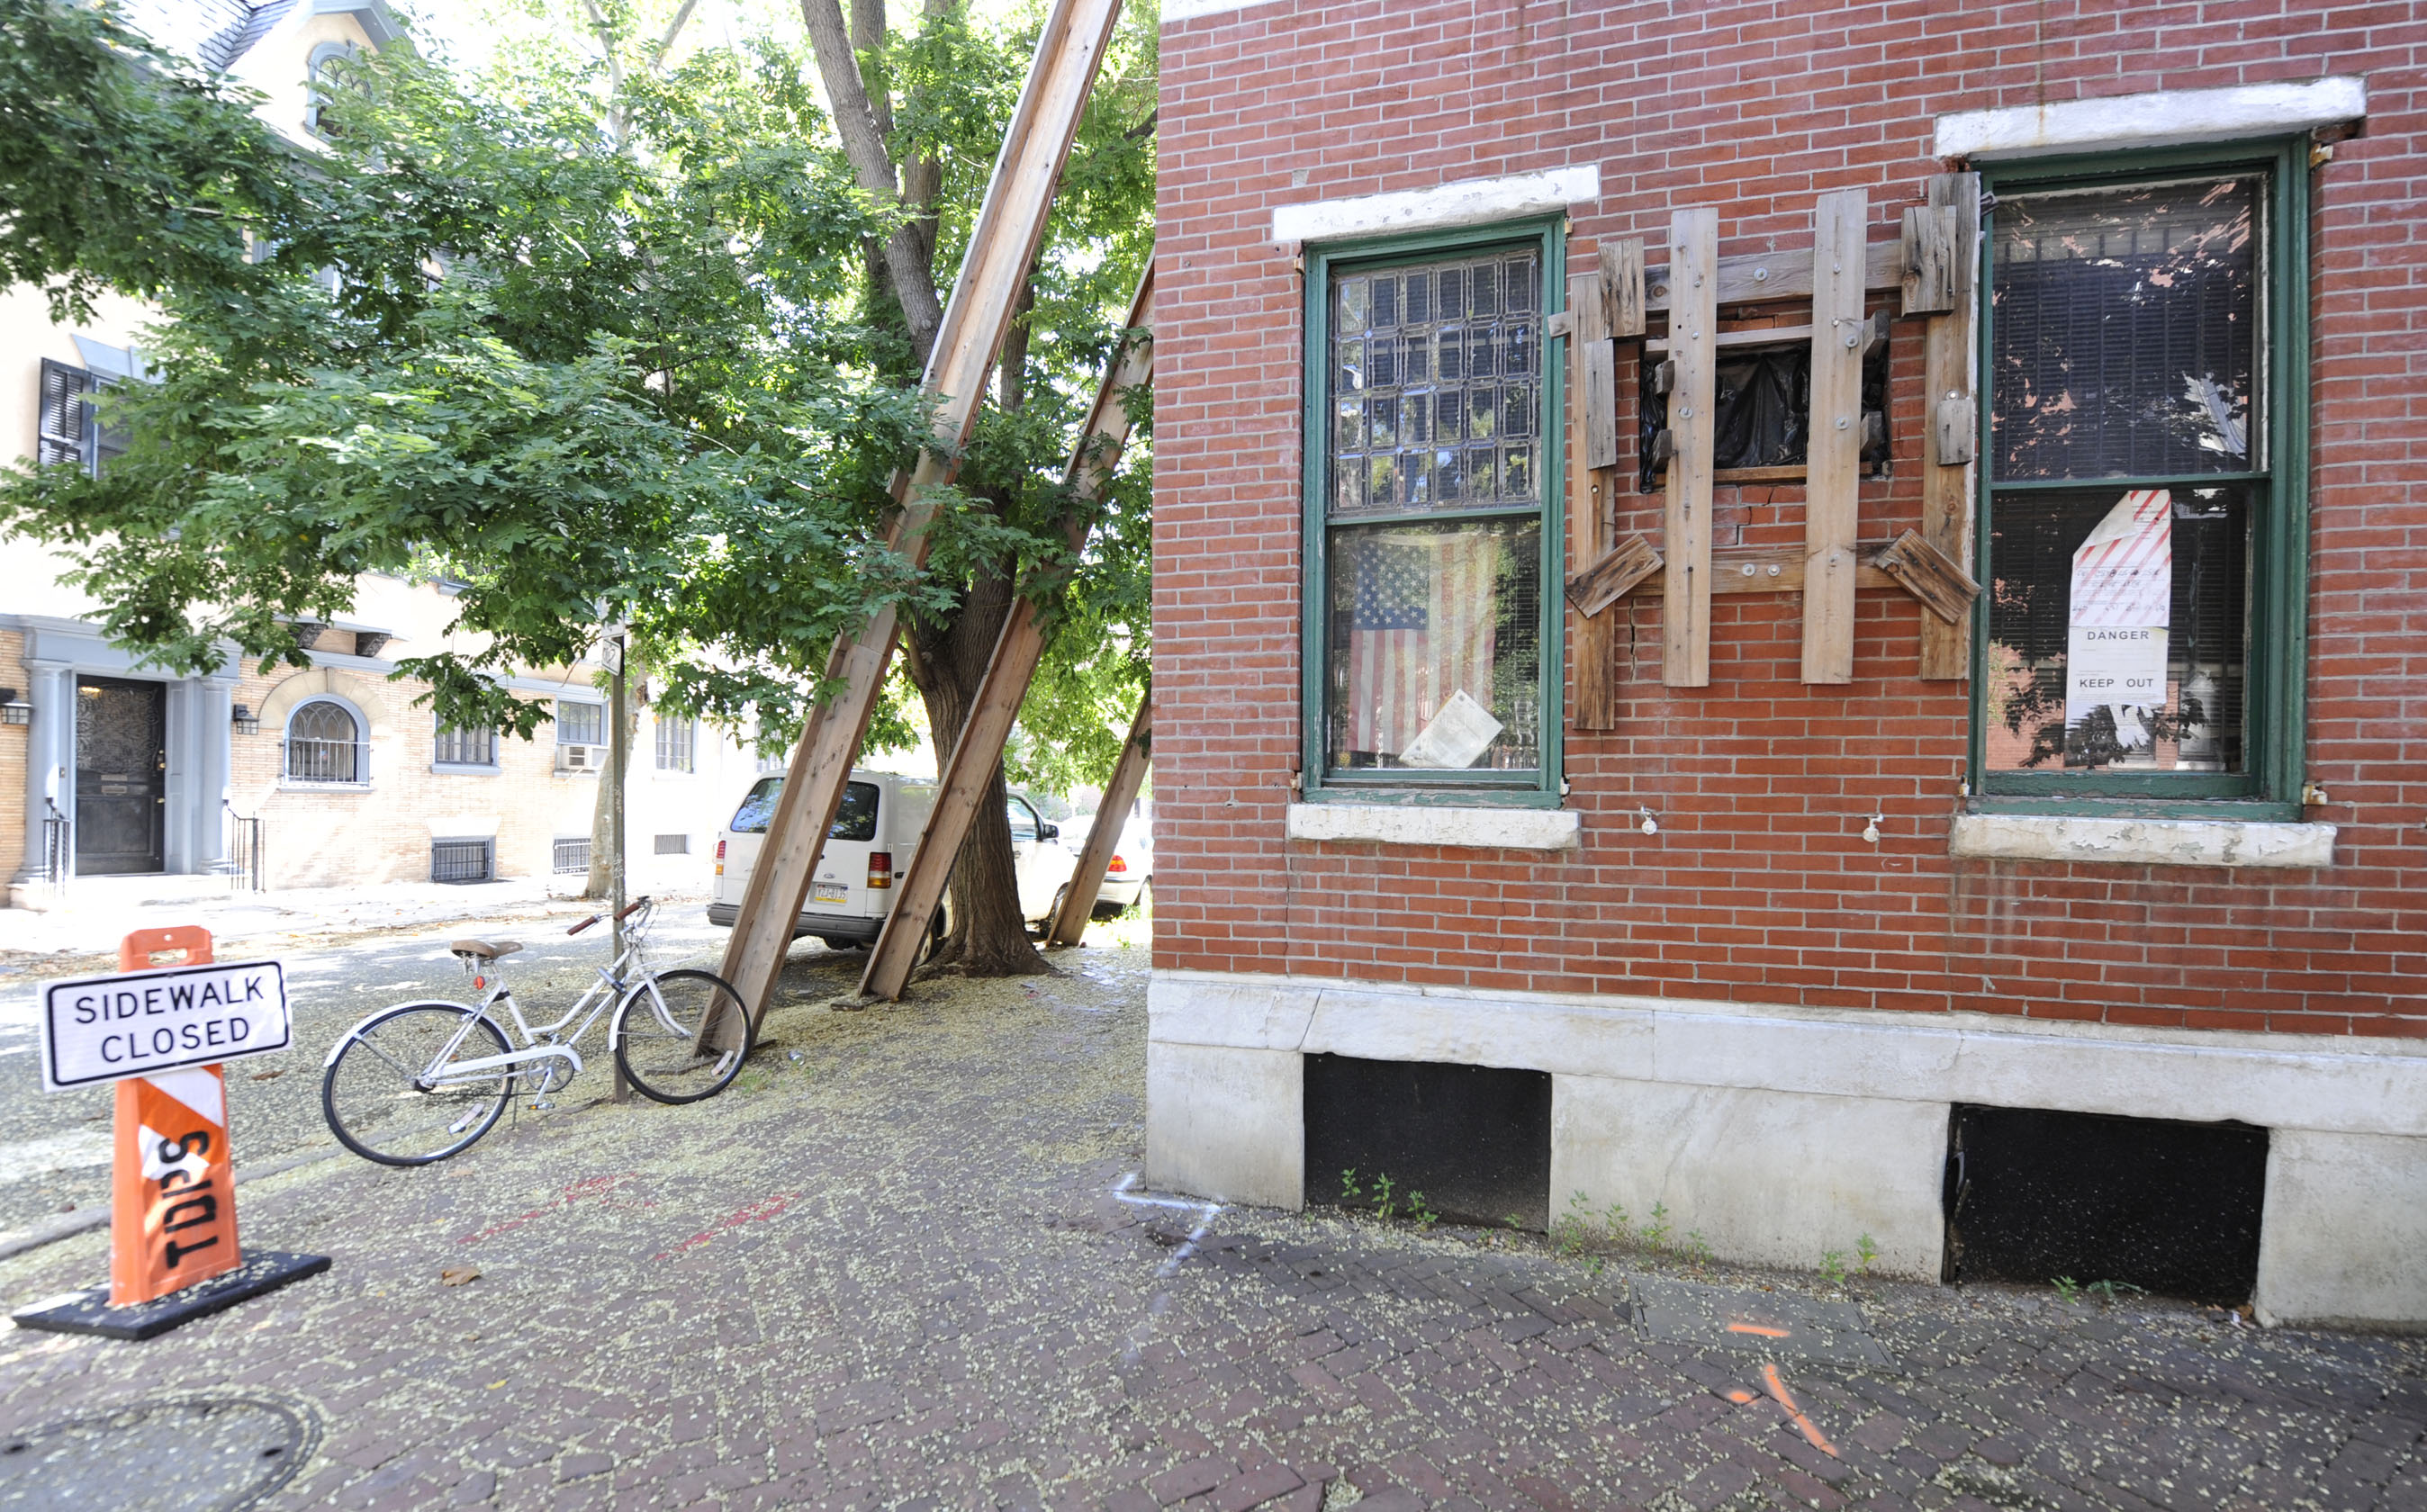 An unsafe tax delinquent eyesore at 18th and Delancey. (Clem Murray - Inquirer)